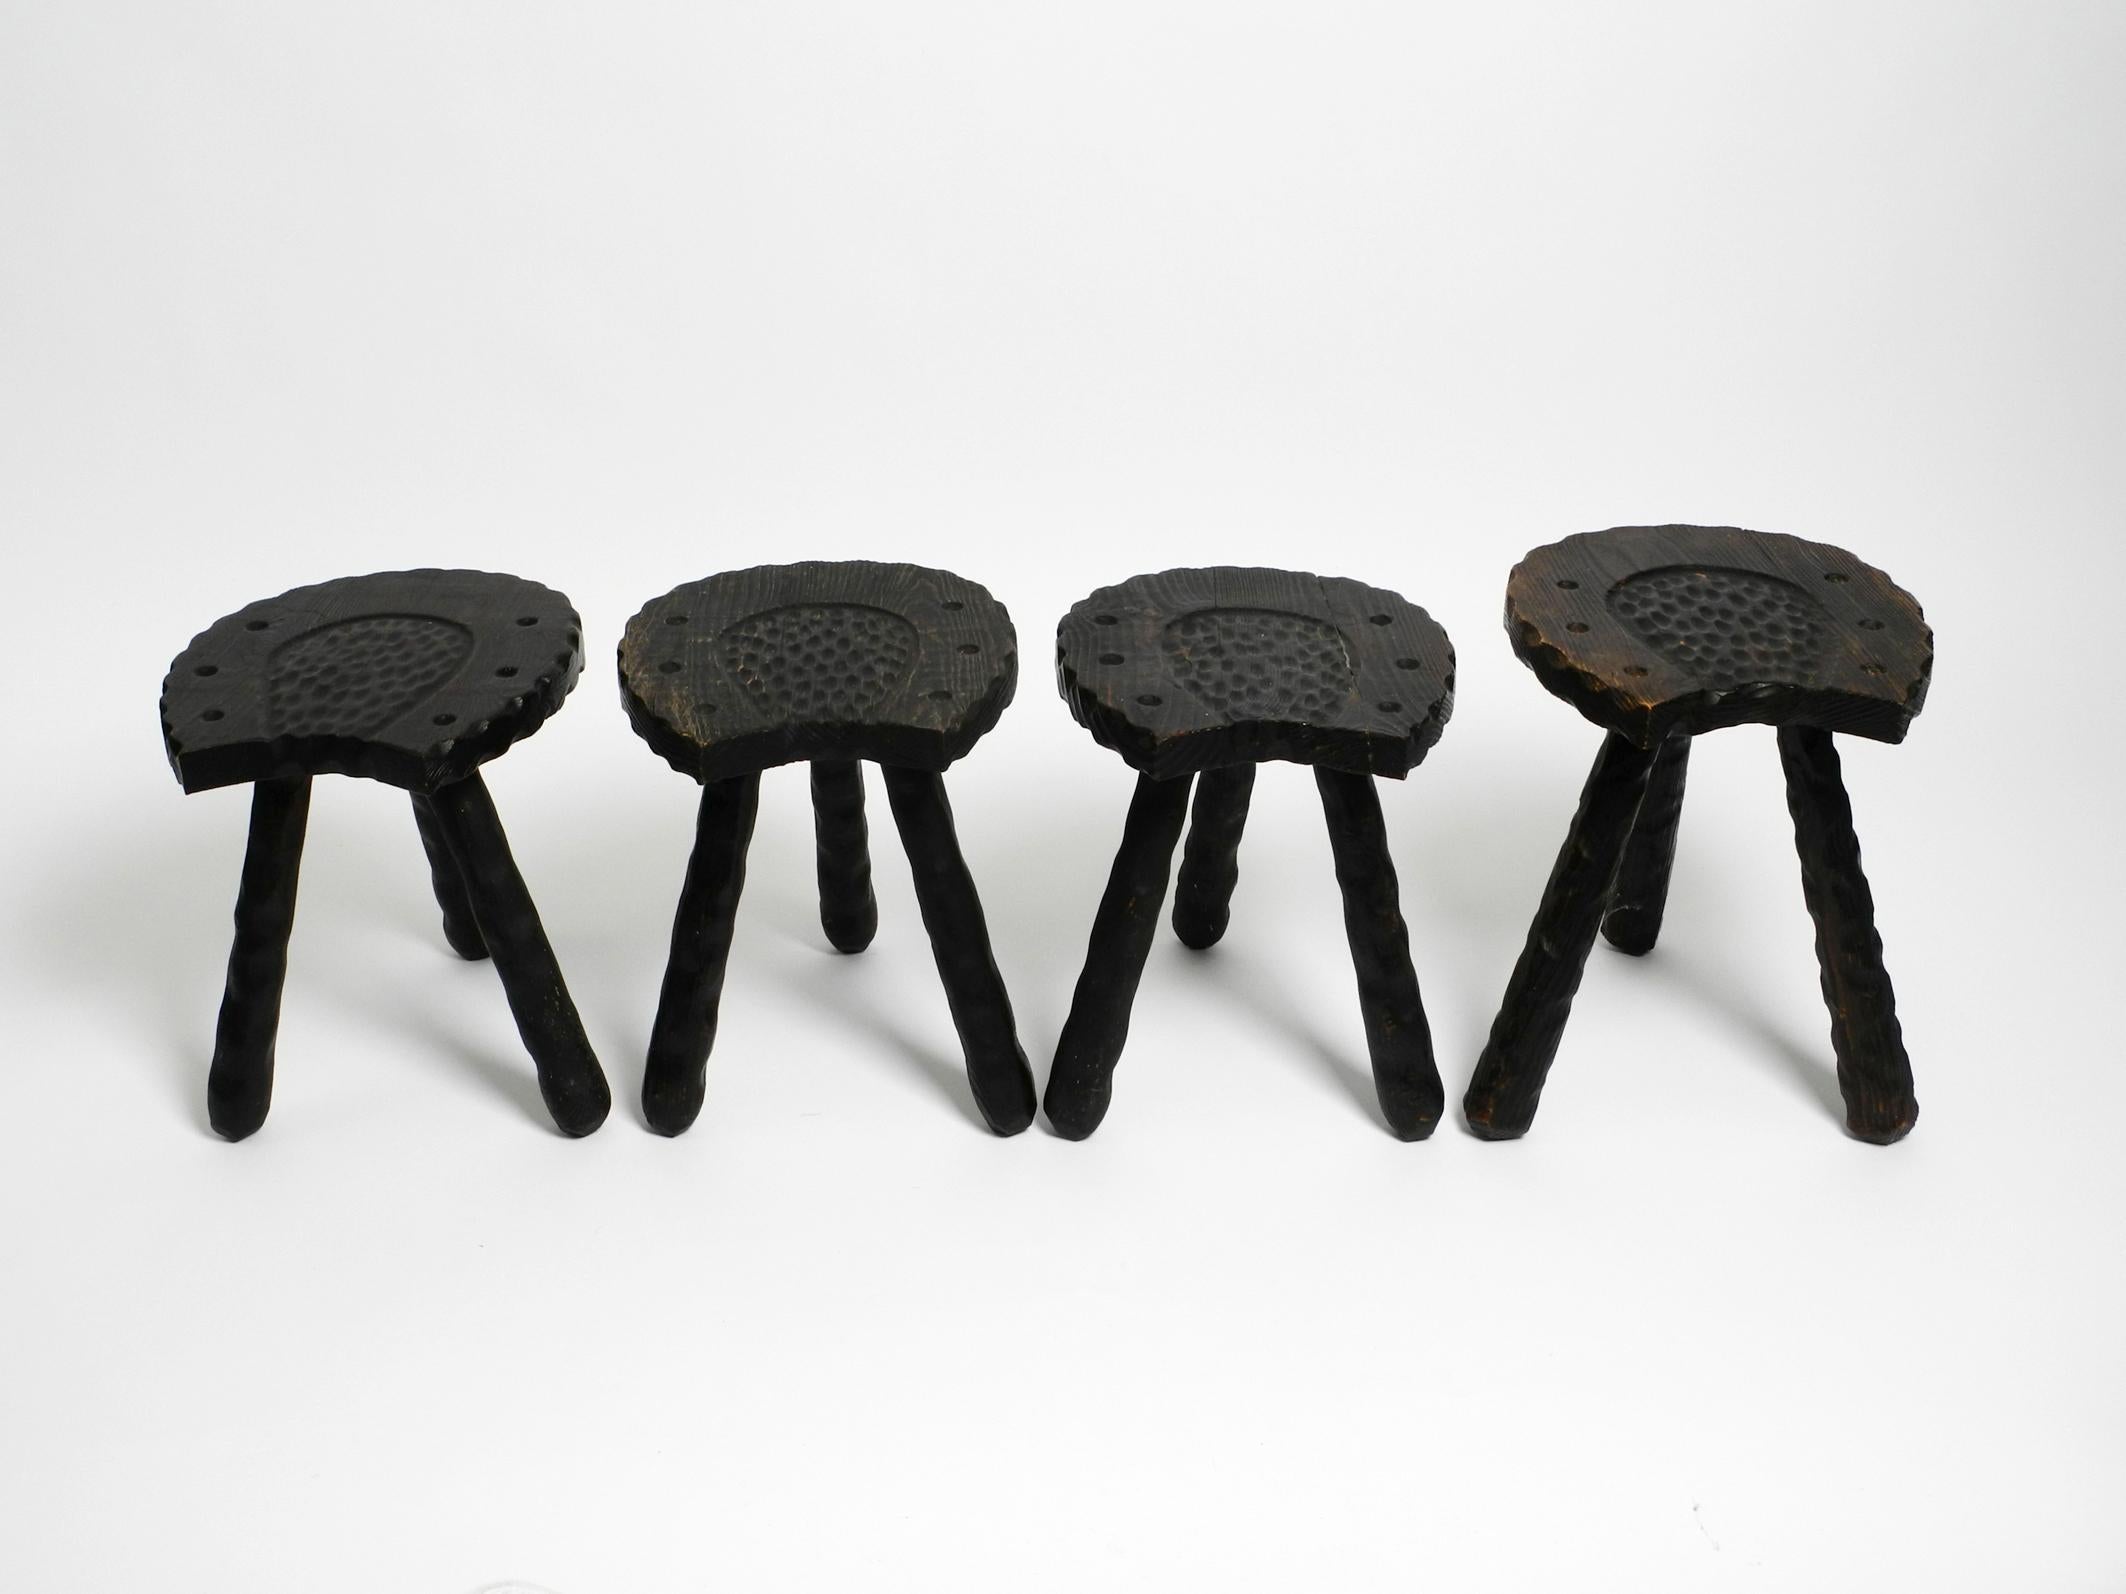 Four unusual Mid Century hand-carved three-legged stools in the shape of a horseshoe.
Made from pine wood stained dark brown.
Without damage with a beautiful patina. Not wobbly.
Legs can be unscrewed.
One stool is 3 cm higher than the other